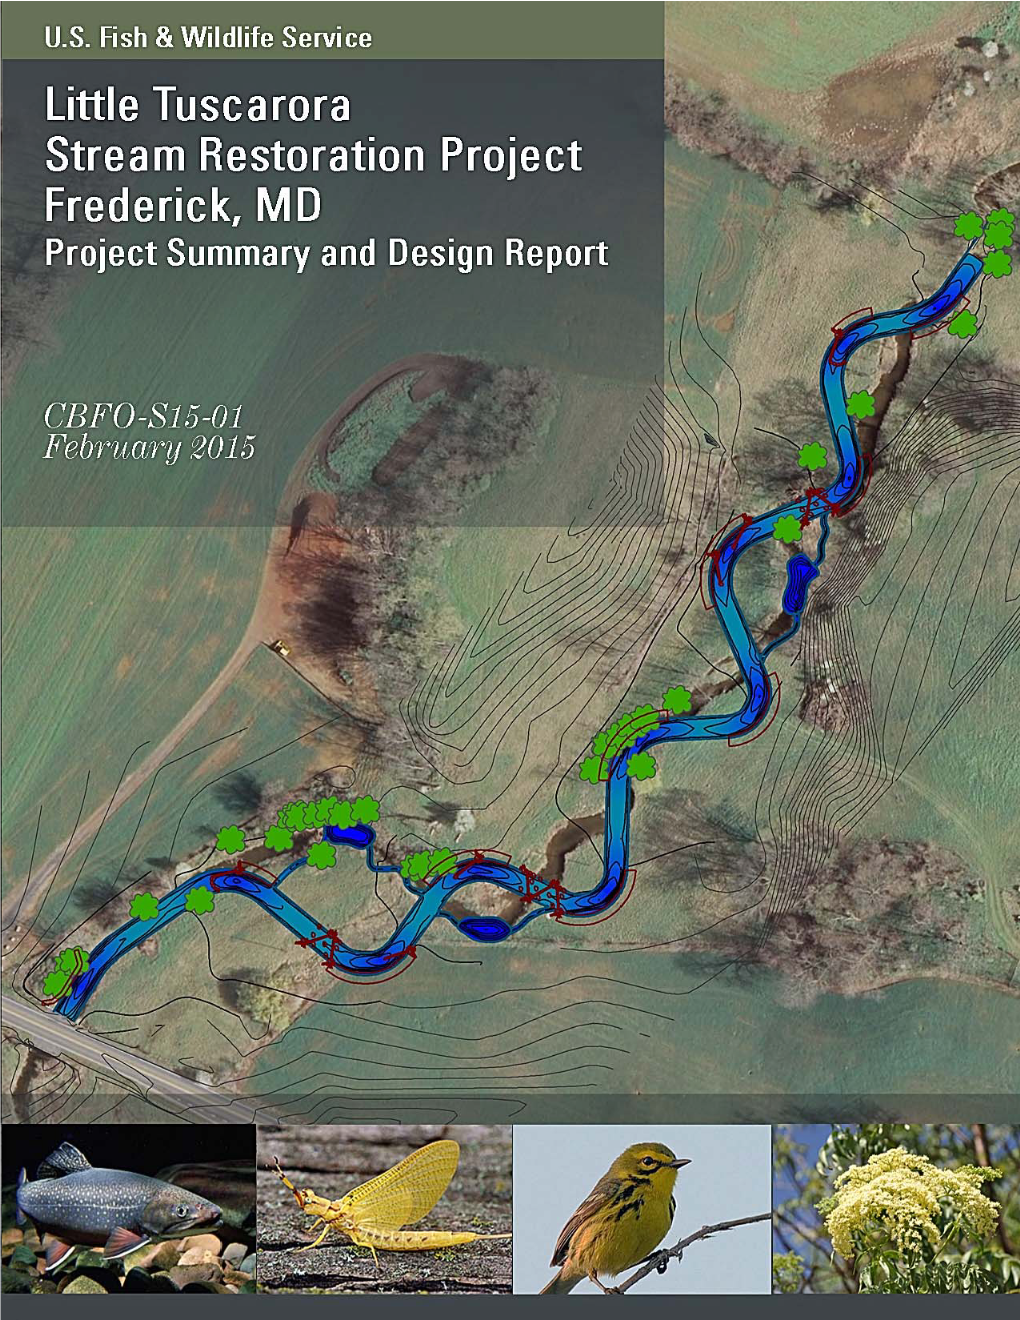 Little Tuscarora Creek Restoration, Frederick County, Maryland: Function-Based Project Summary and Design Report